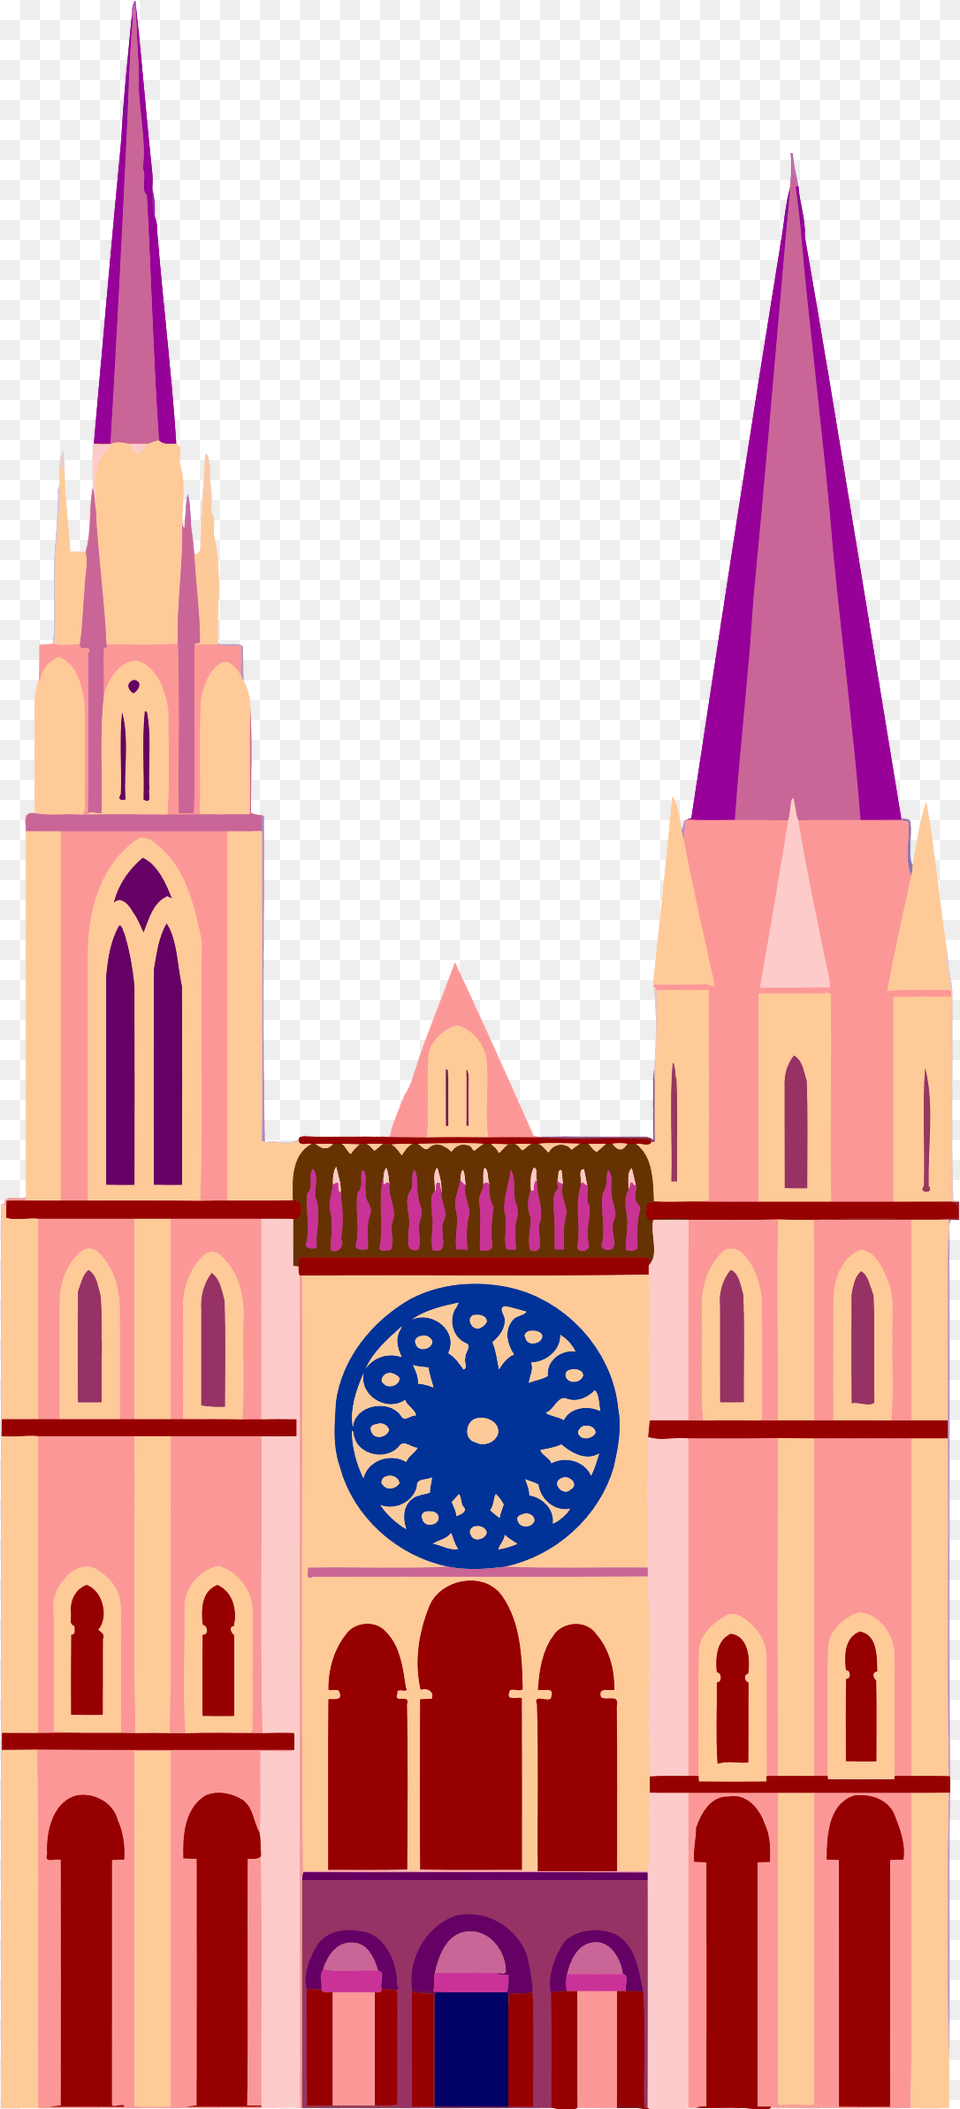 Fairytale Castle 8 Clip Arts Cathedral Clipart, Architecture, Building, Clock Tower, Spire Png Image